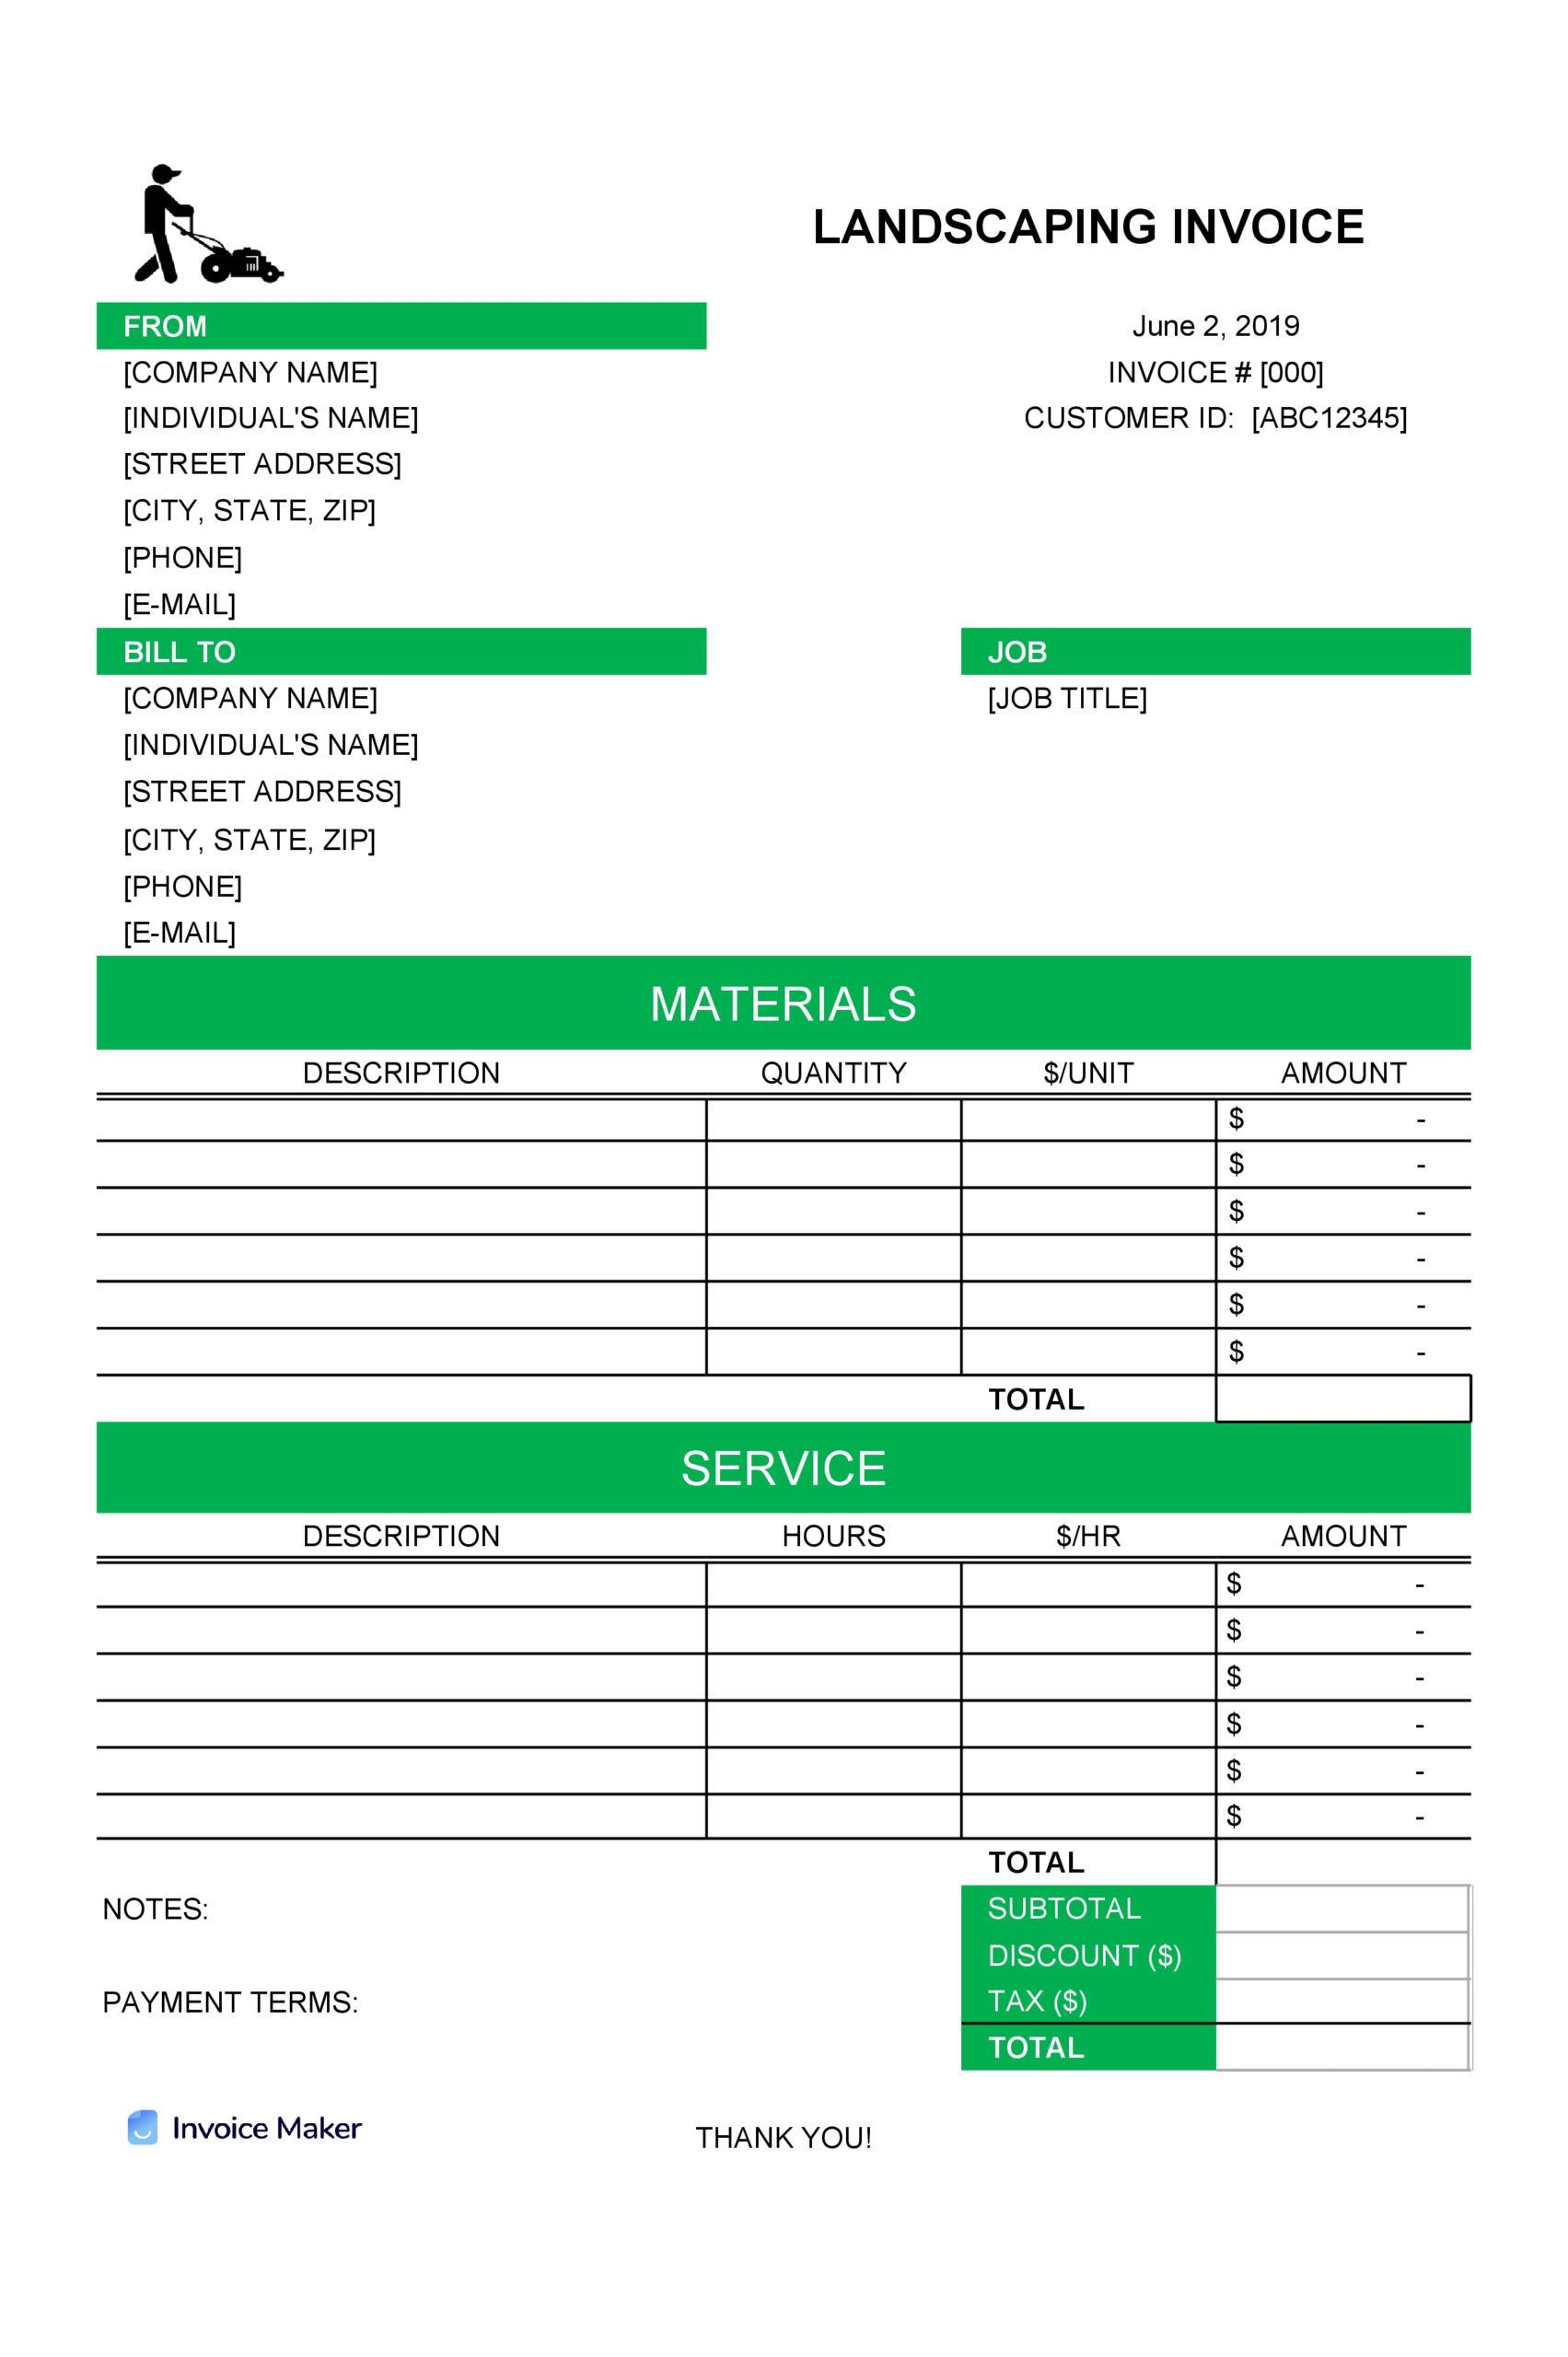 Free landscaping invoice 15